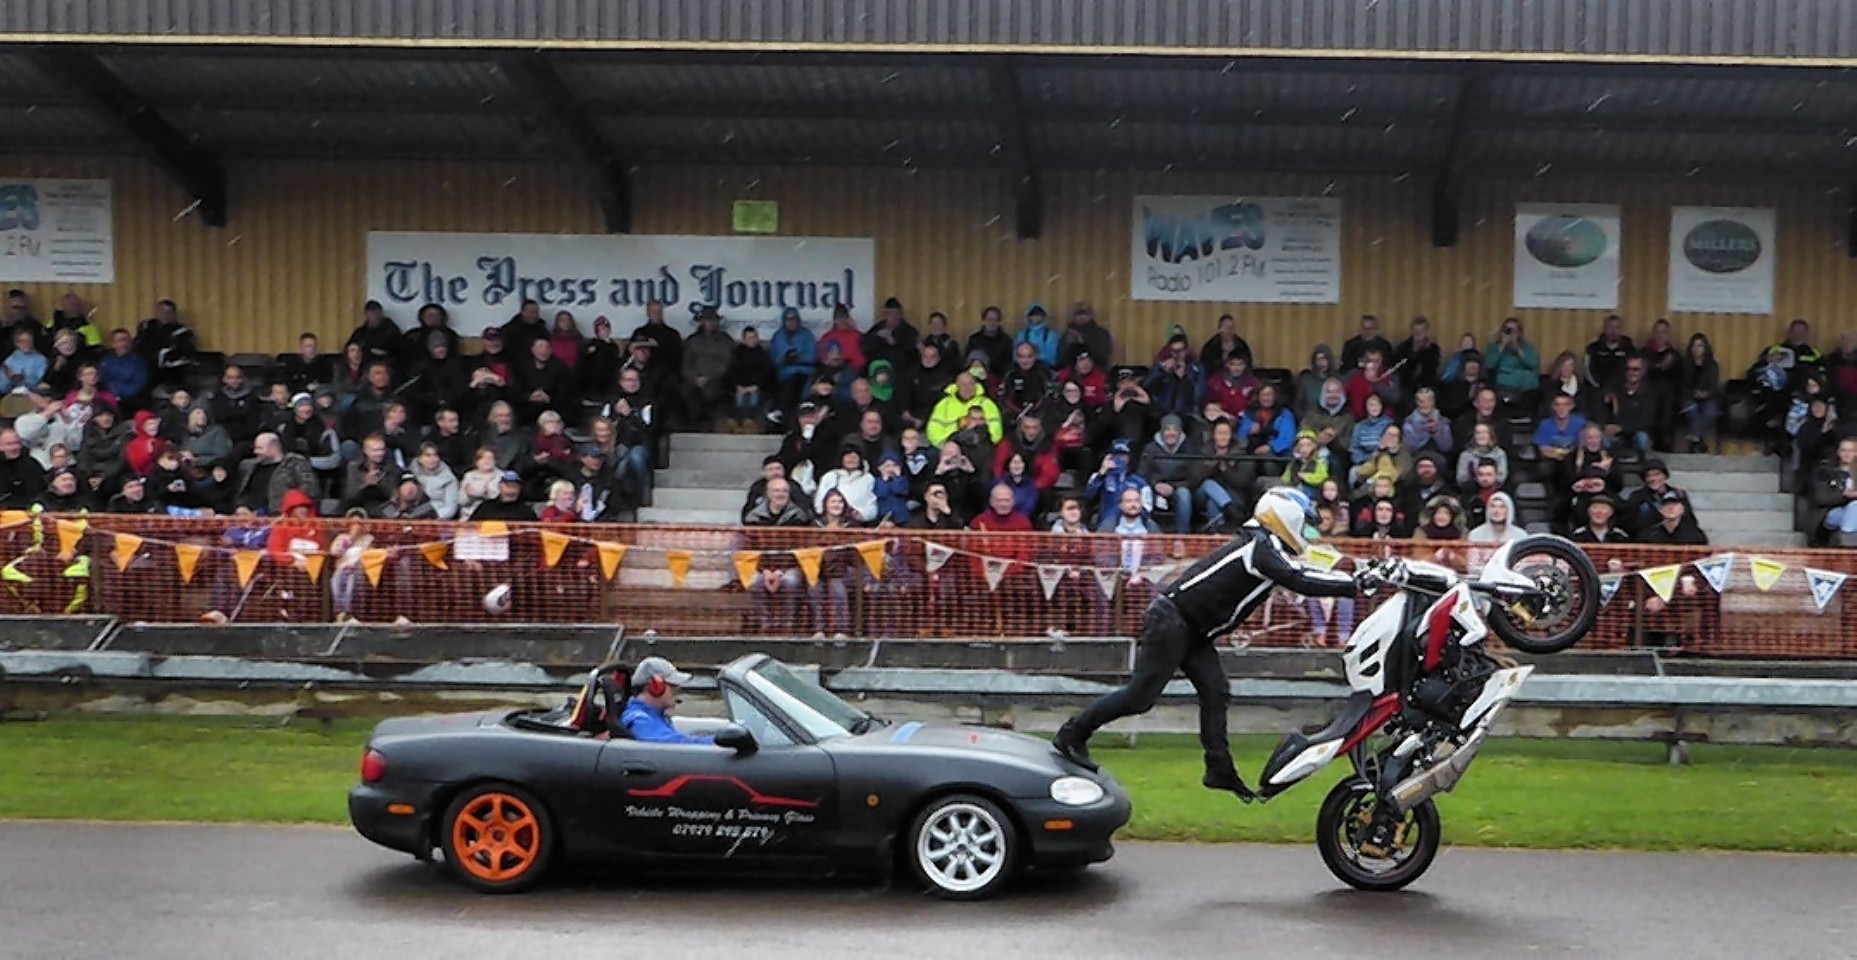 The Grampian Motorcycle Convention is one of the biggest in the UK